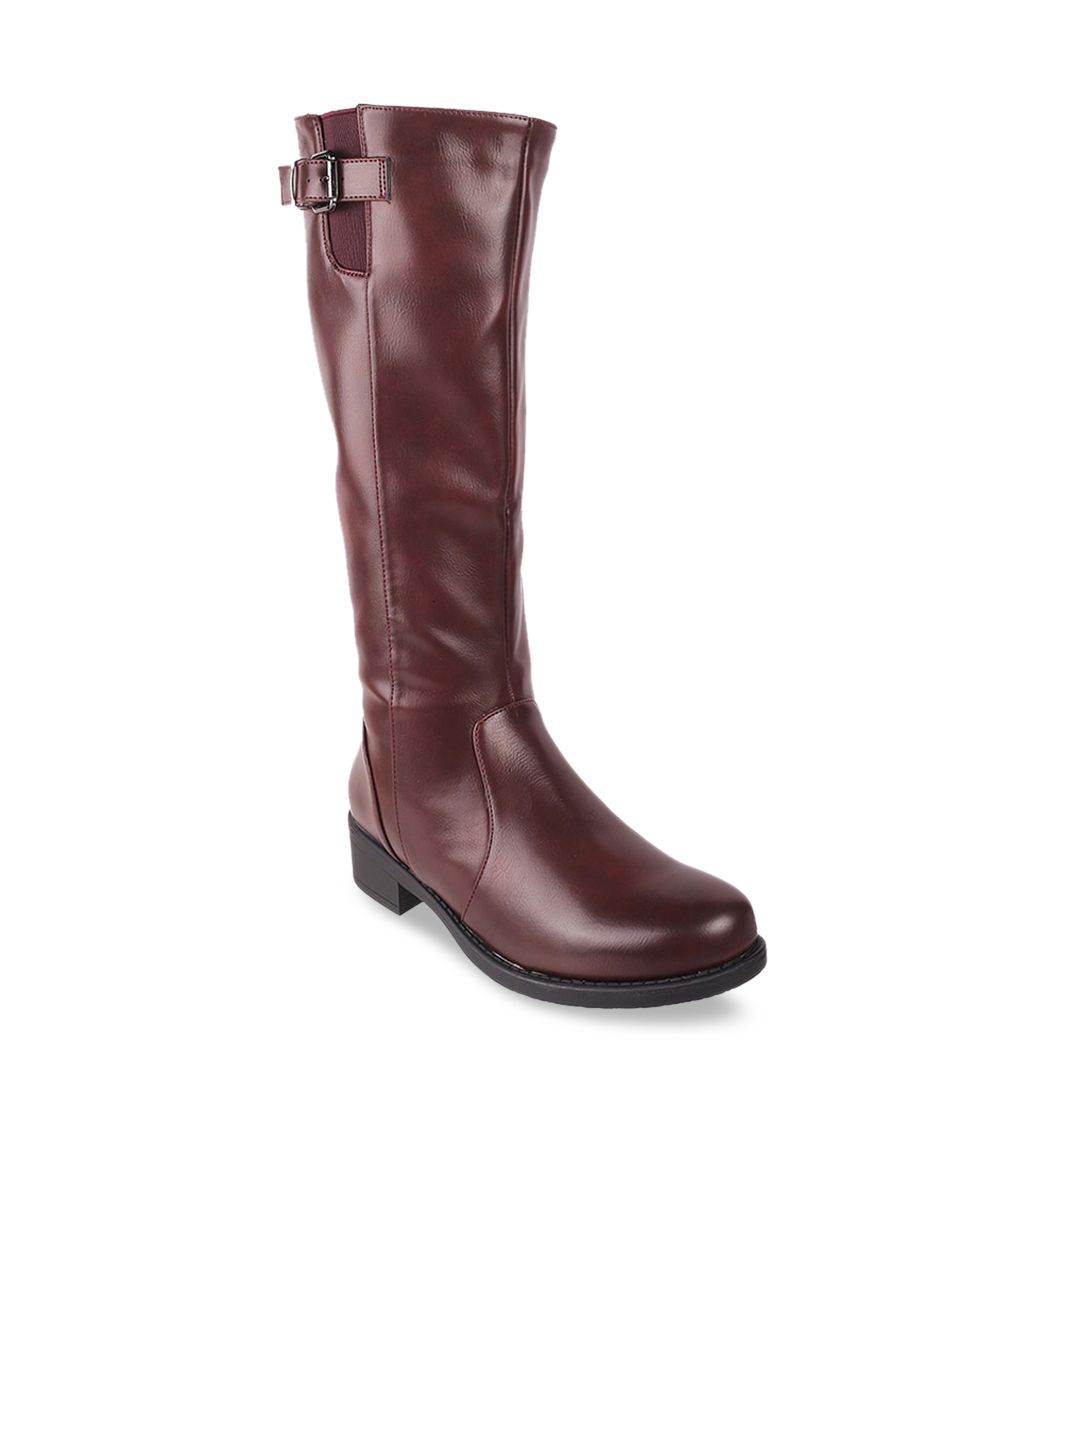 Metro Women Maroon Solid Heeled Boots Price in India